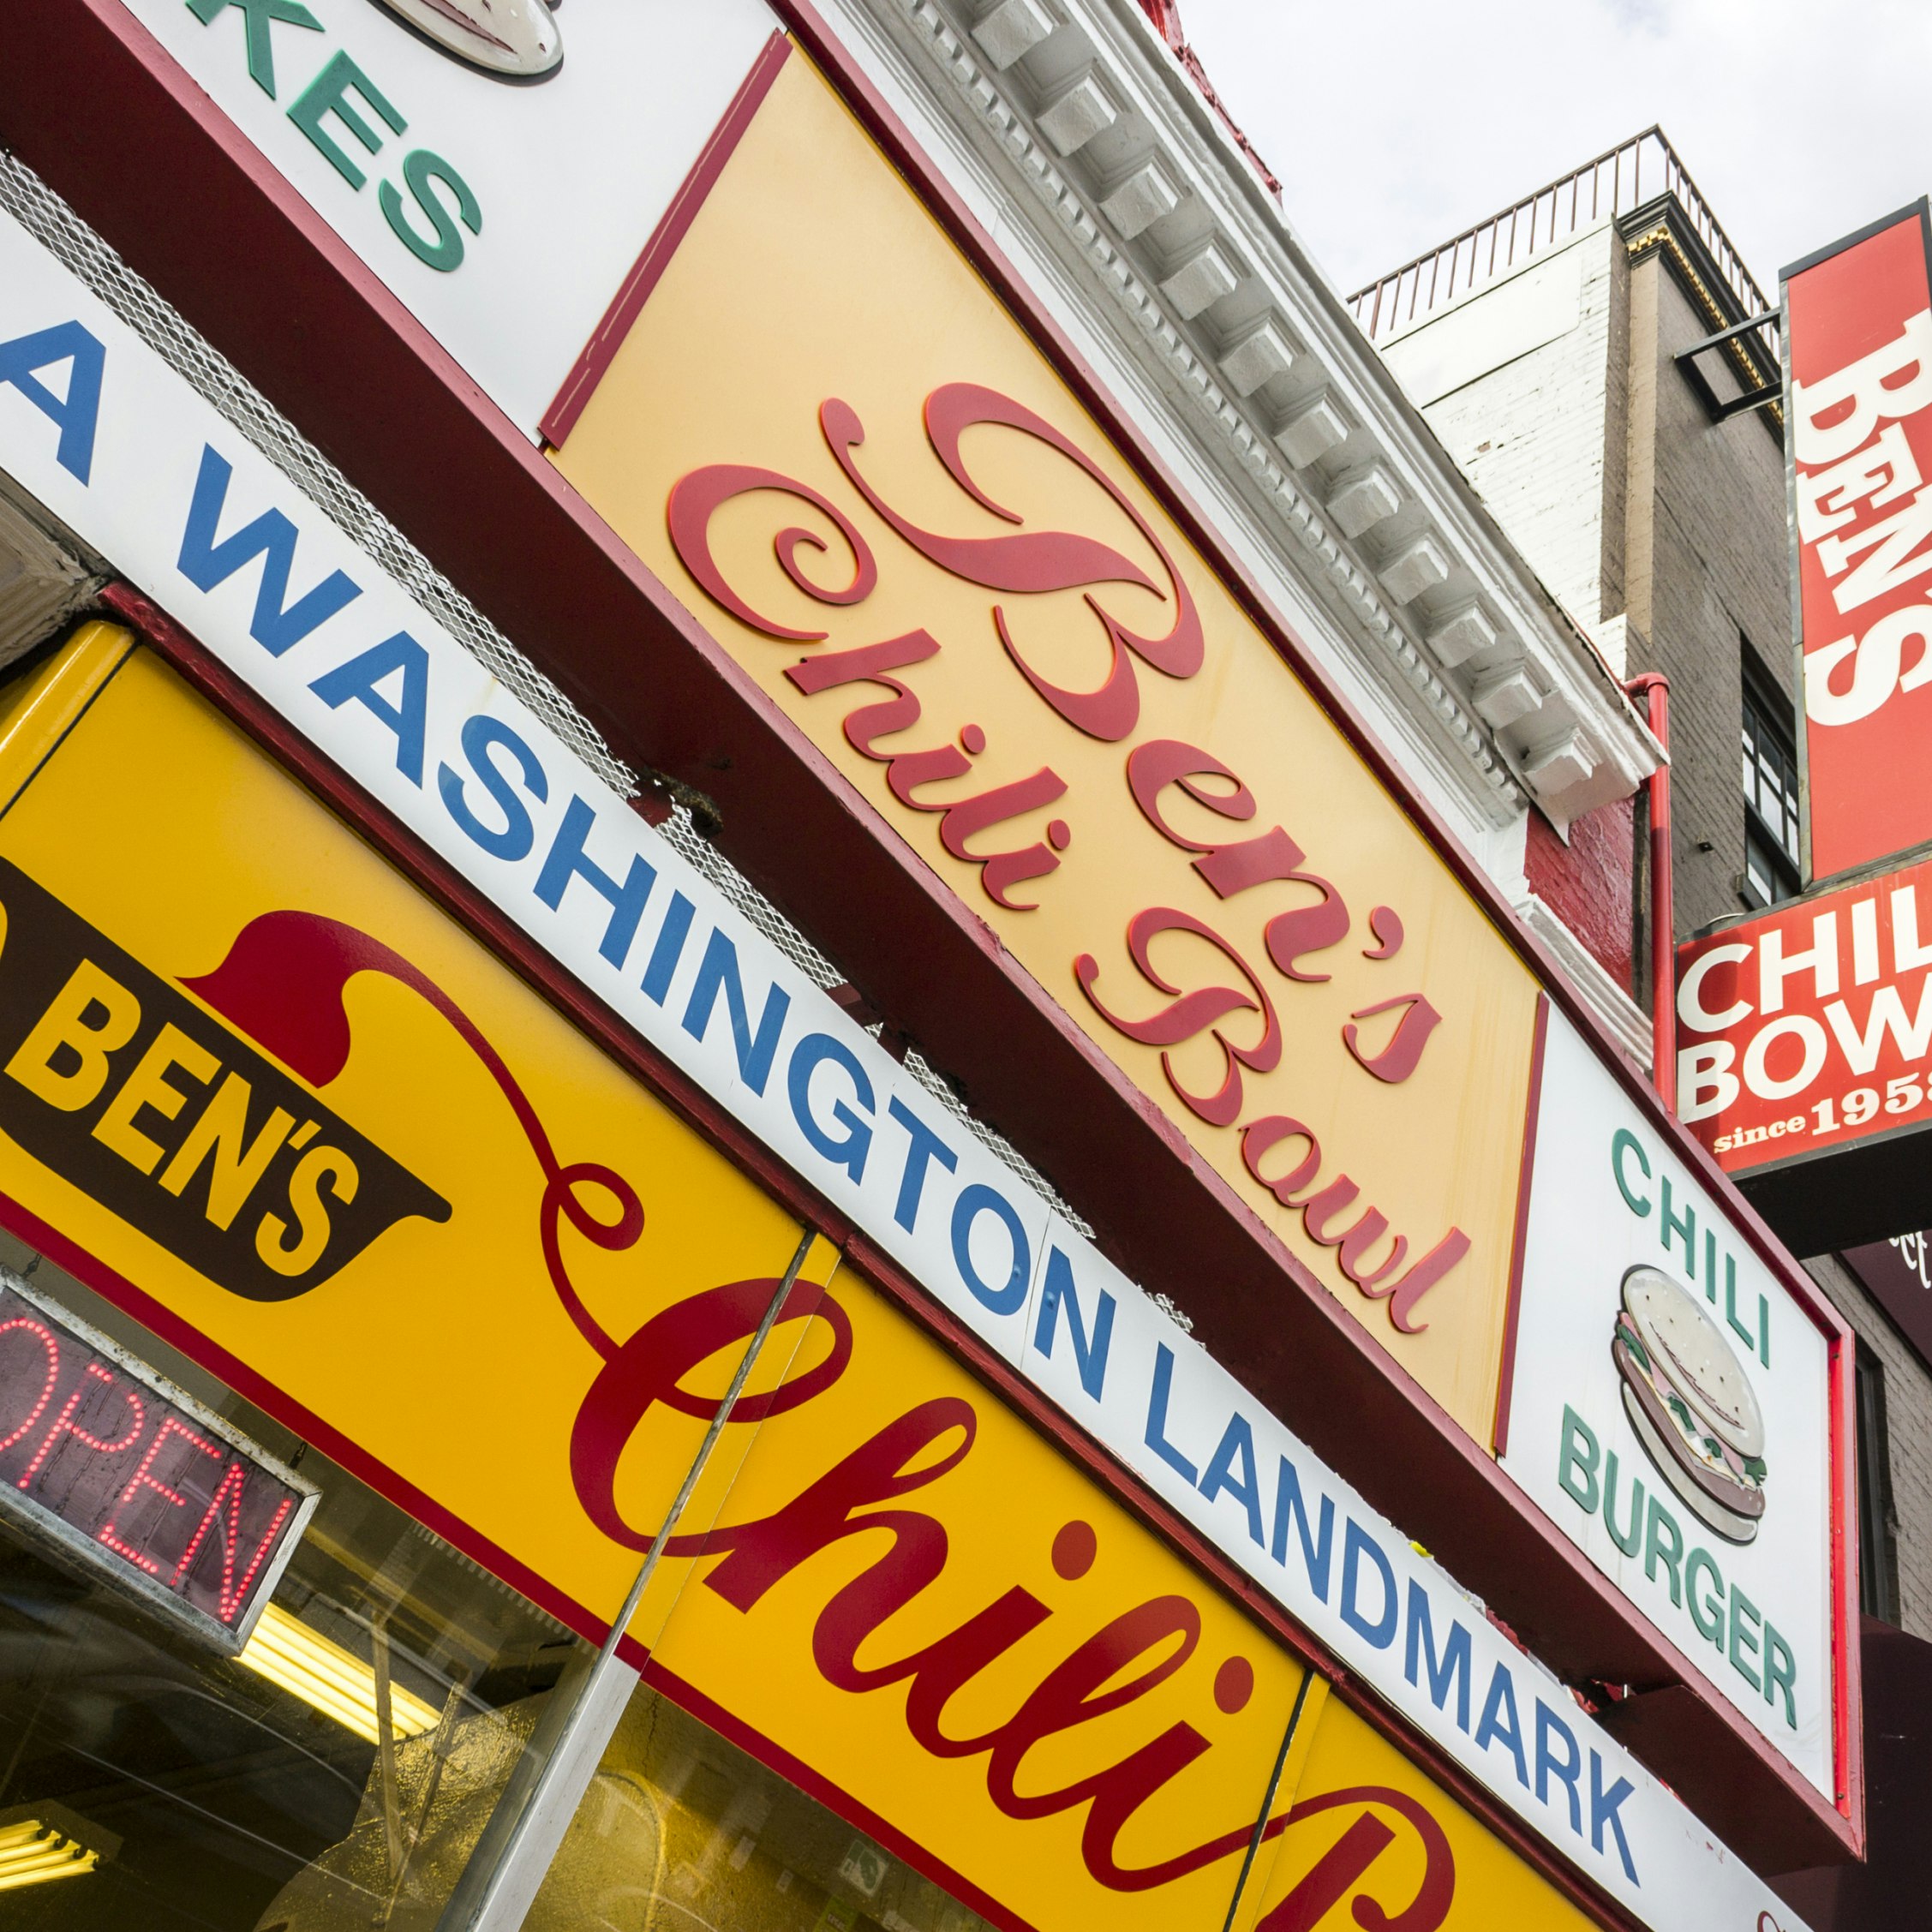 Washington, D.C. Ben's Chili Bowl, a major landmark restaurant founded in 1958 located at 1213 U Street in the Shaw neighborhood. Known locally for its chili dogs, half-smokes, and milkshakes